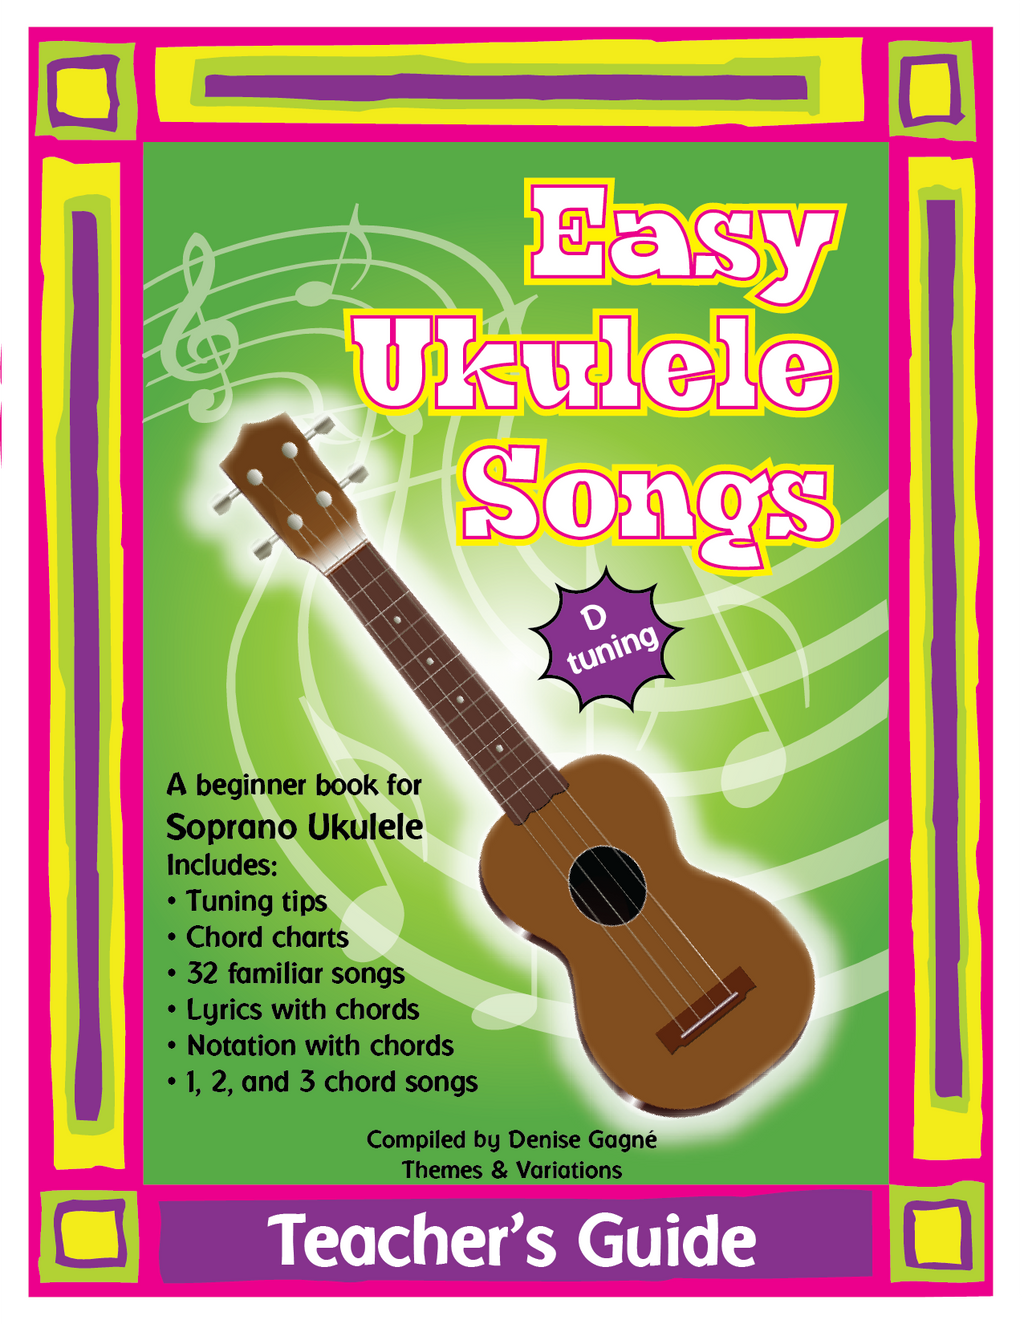 Book cover: A green background with a ukulele in the centre